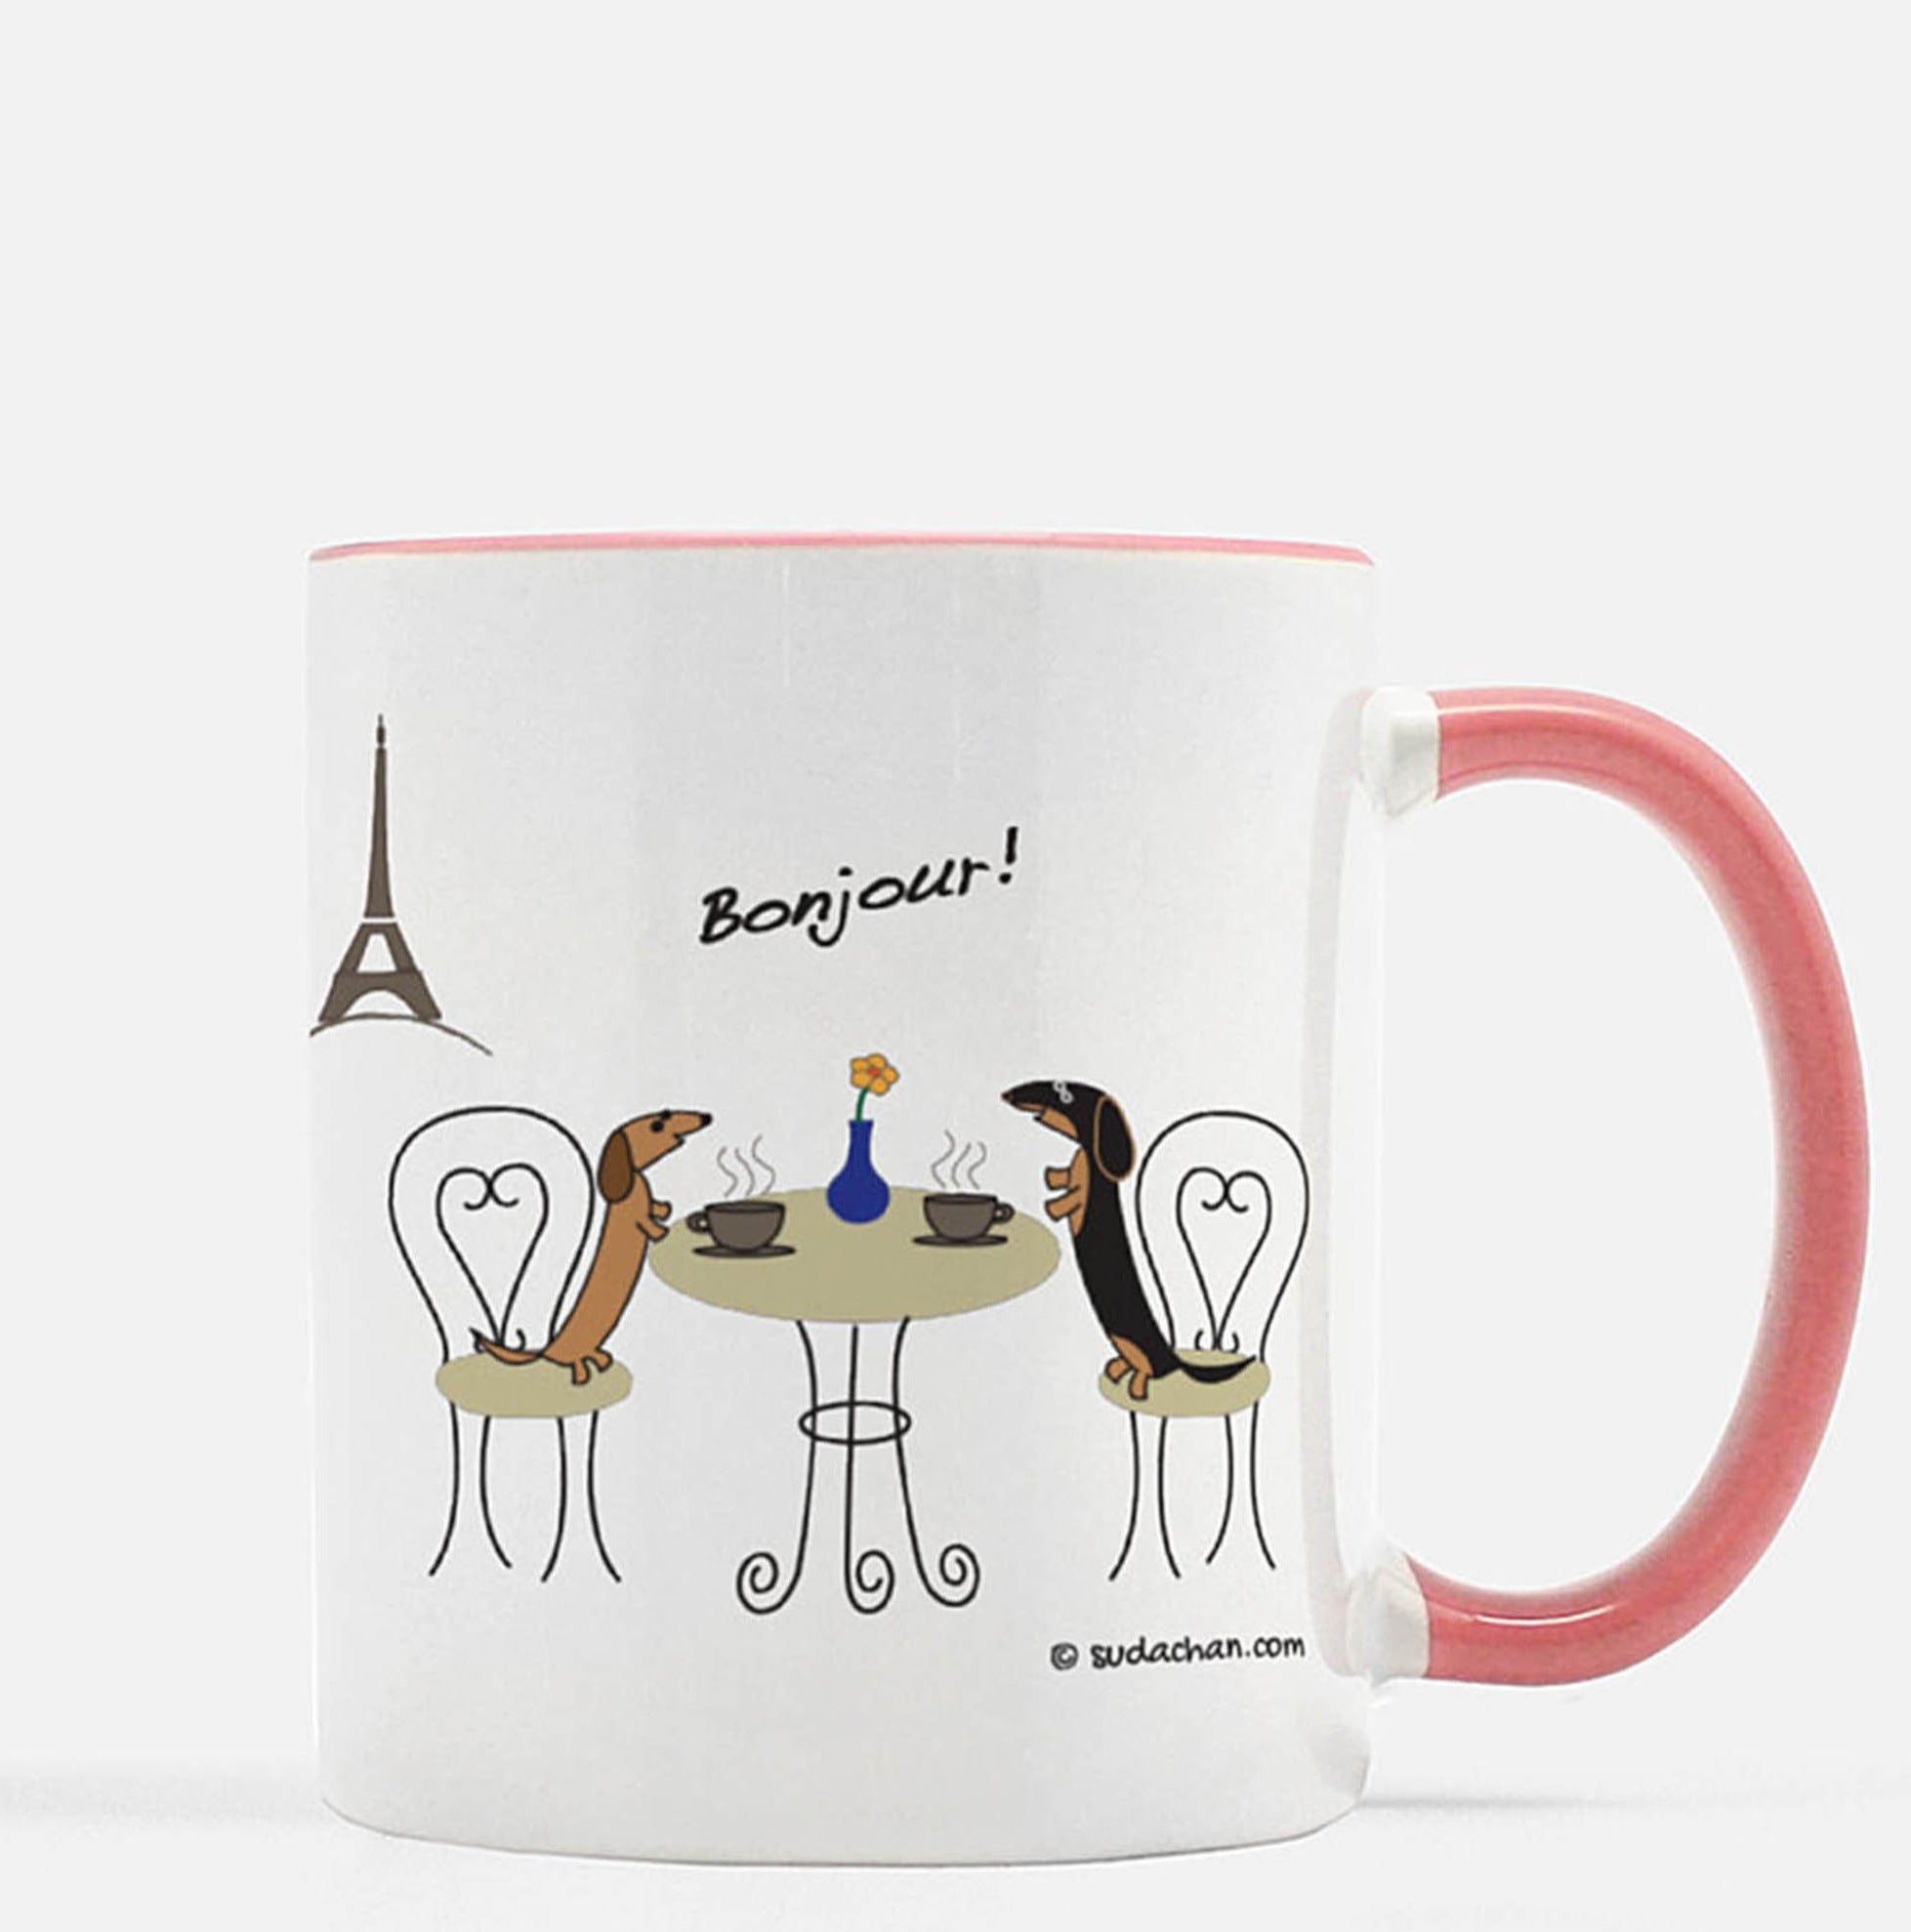 Two dachshunds in paris cafe pink and white ceramic mug.